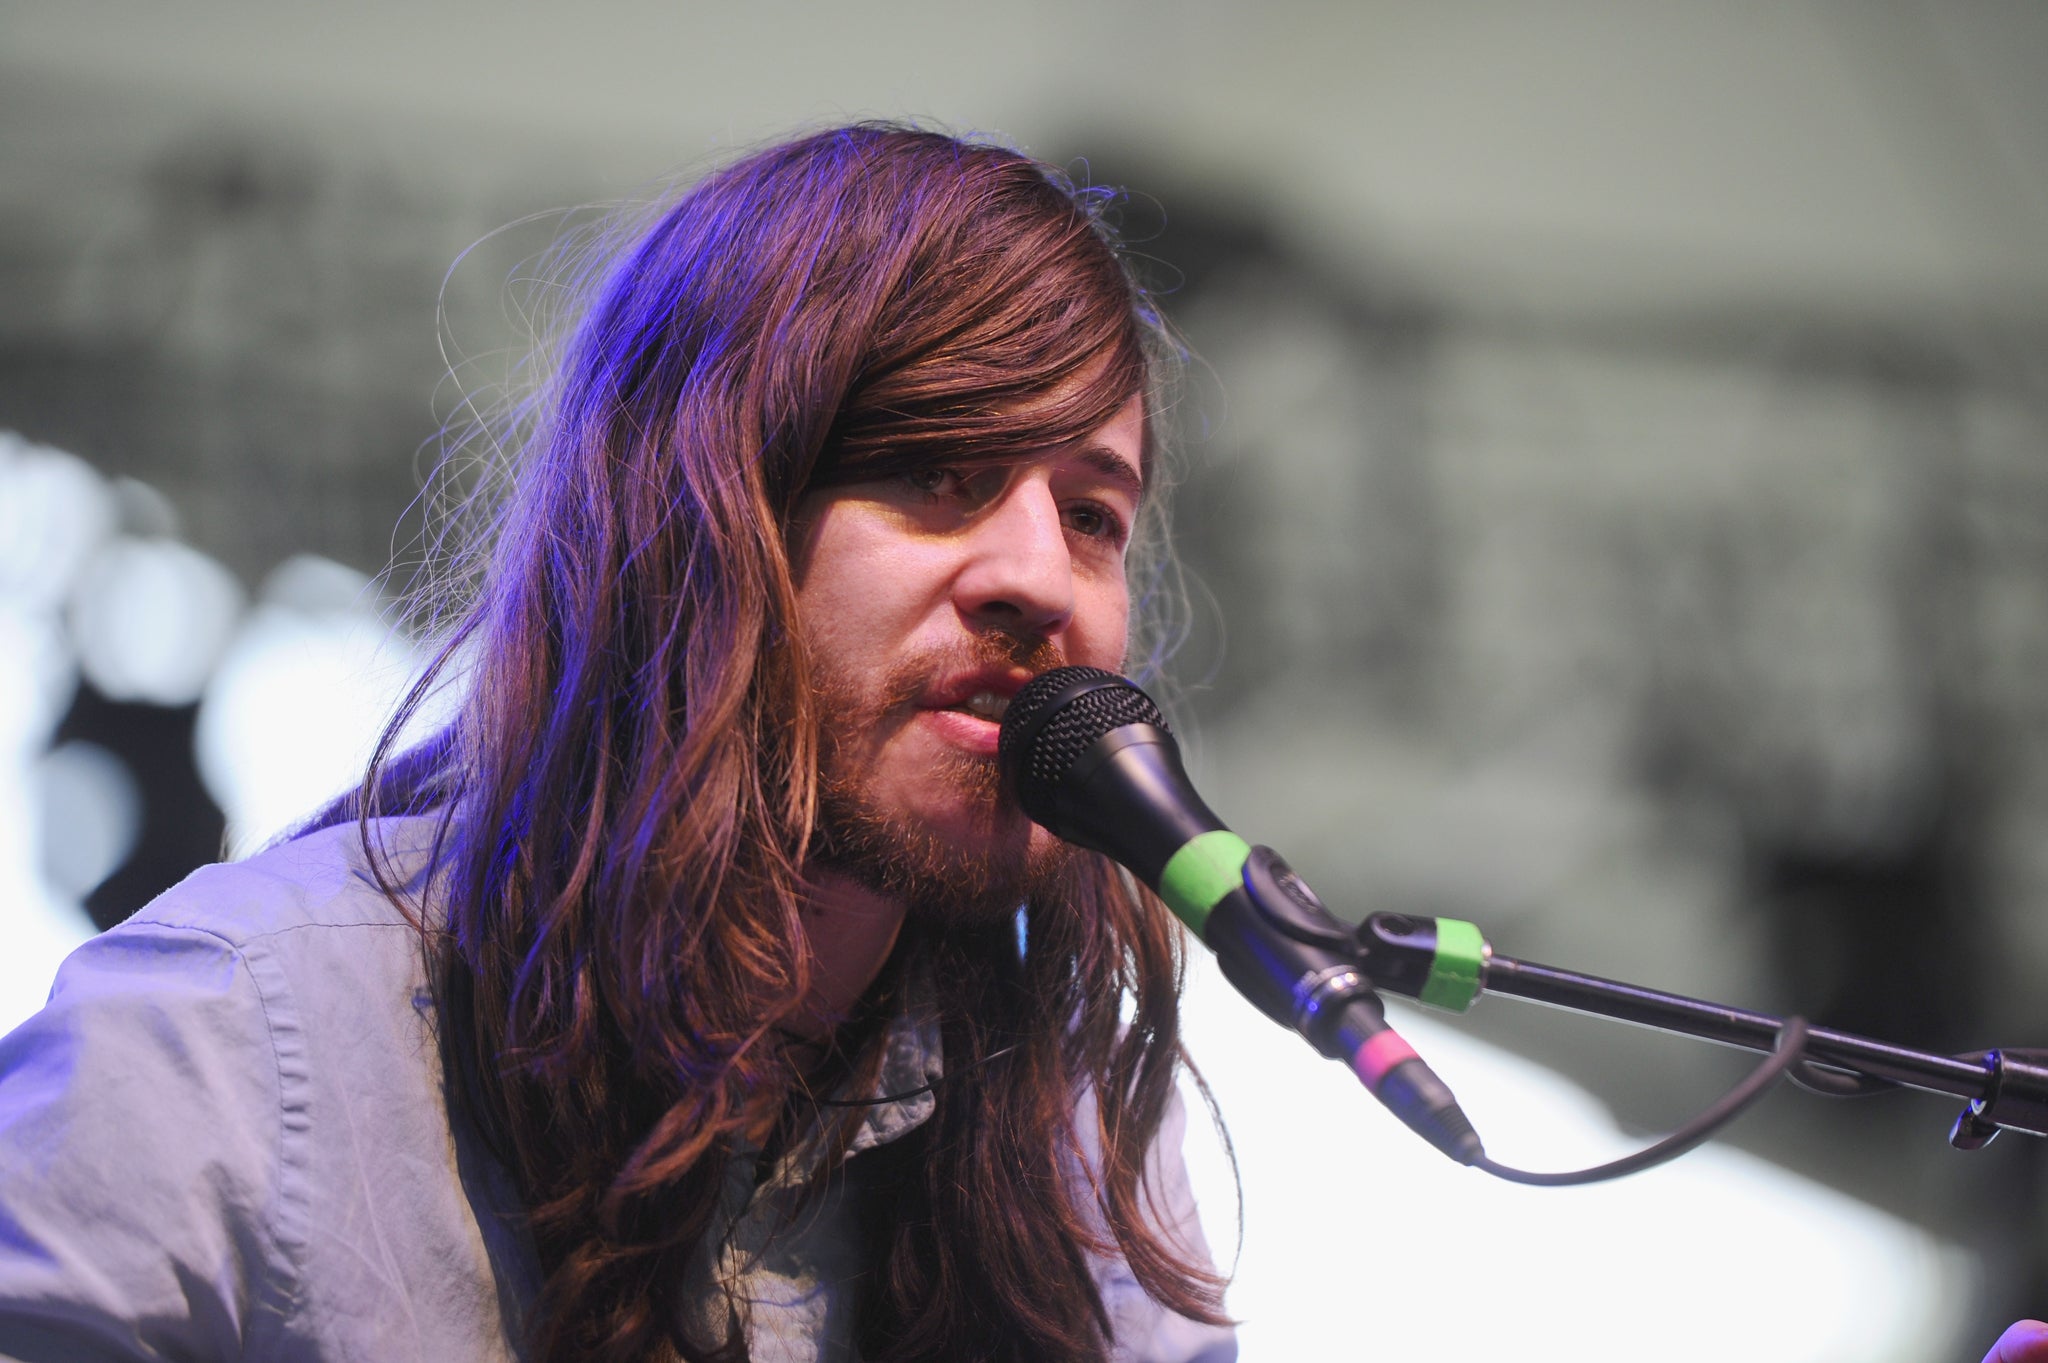 Other Lives perform on stage at Coachella